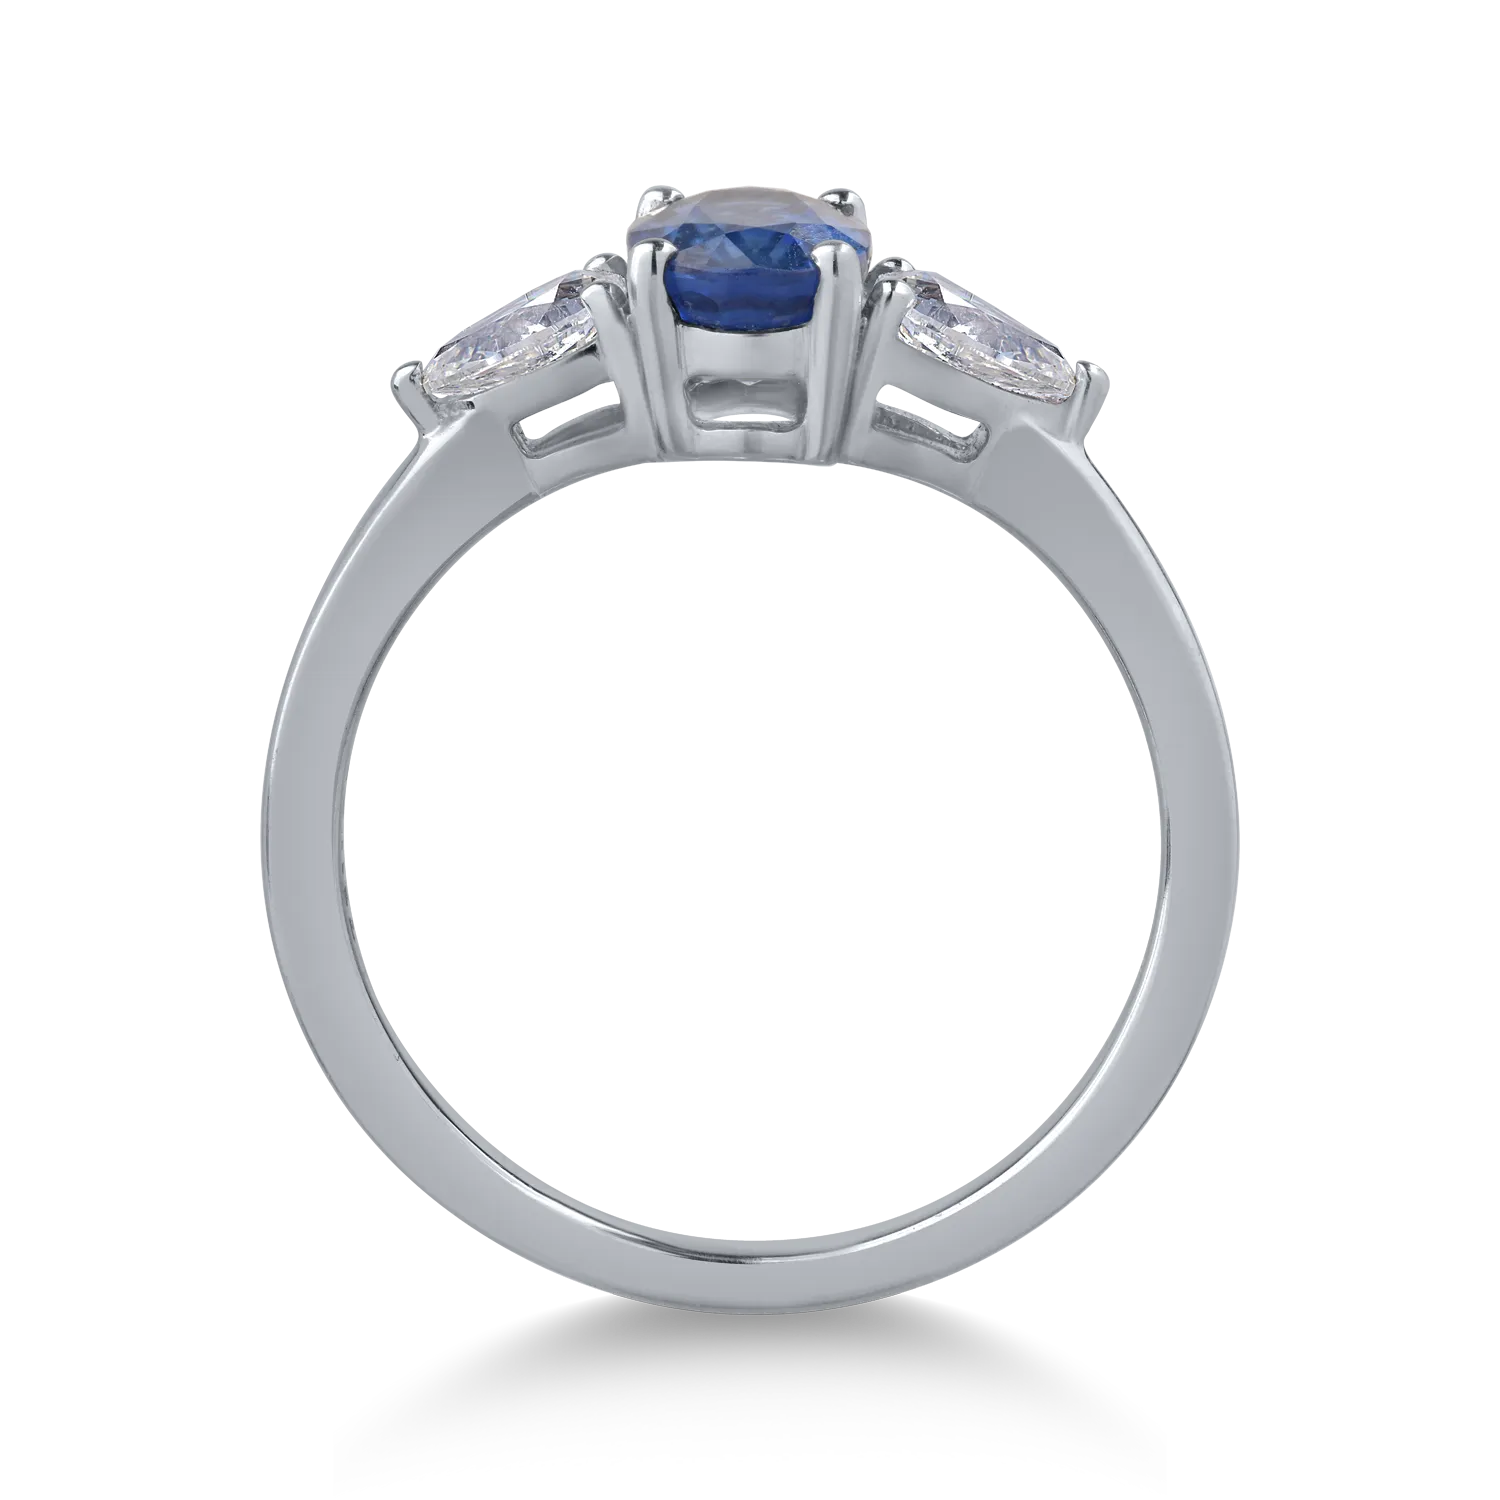 14K white gold ring with 1.26ct sapphire and 0.49ct diamonds